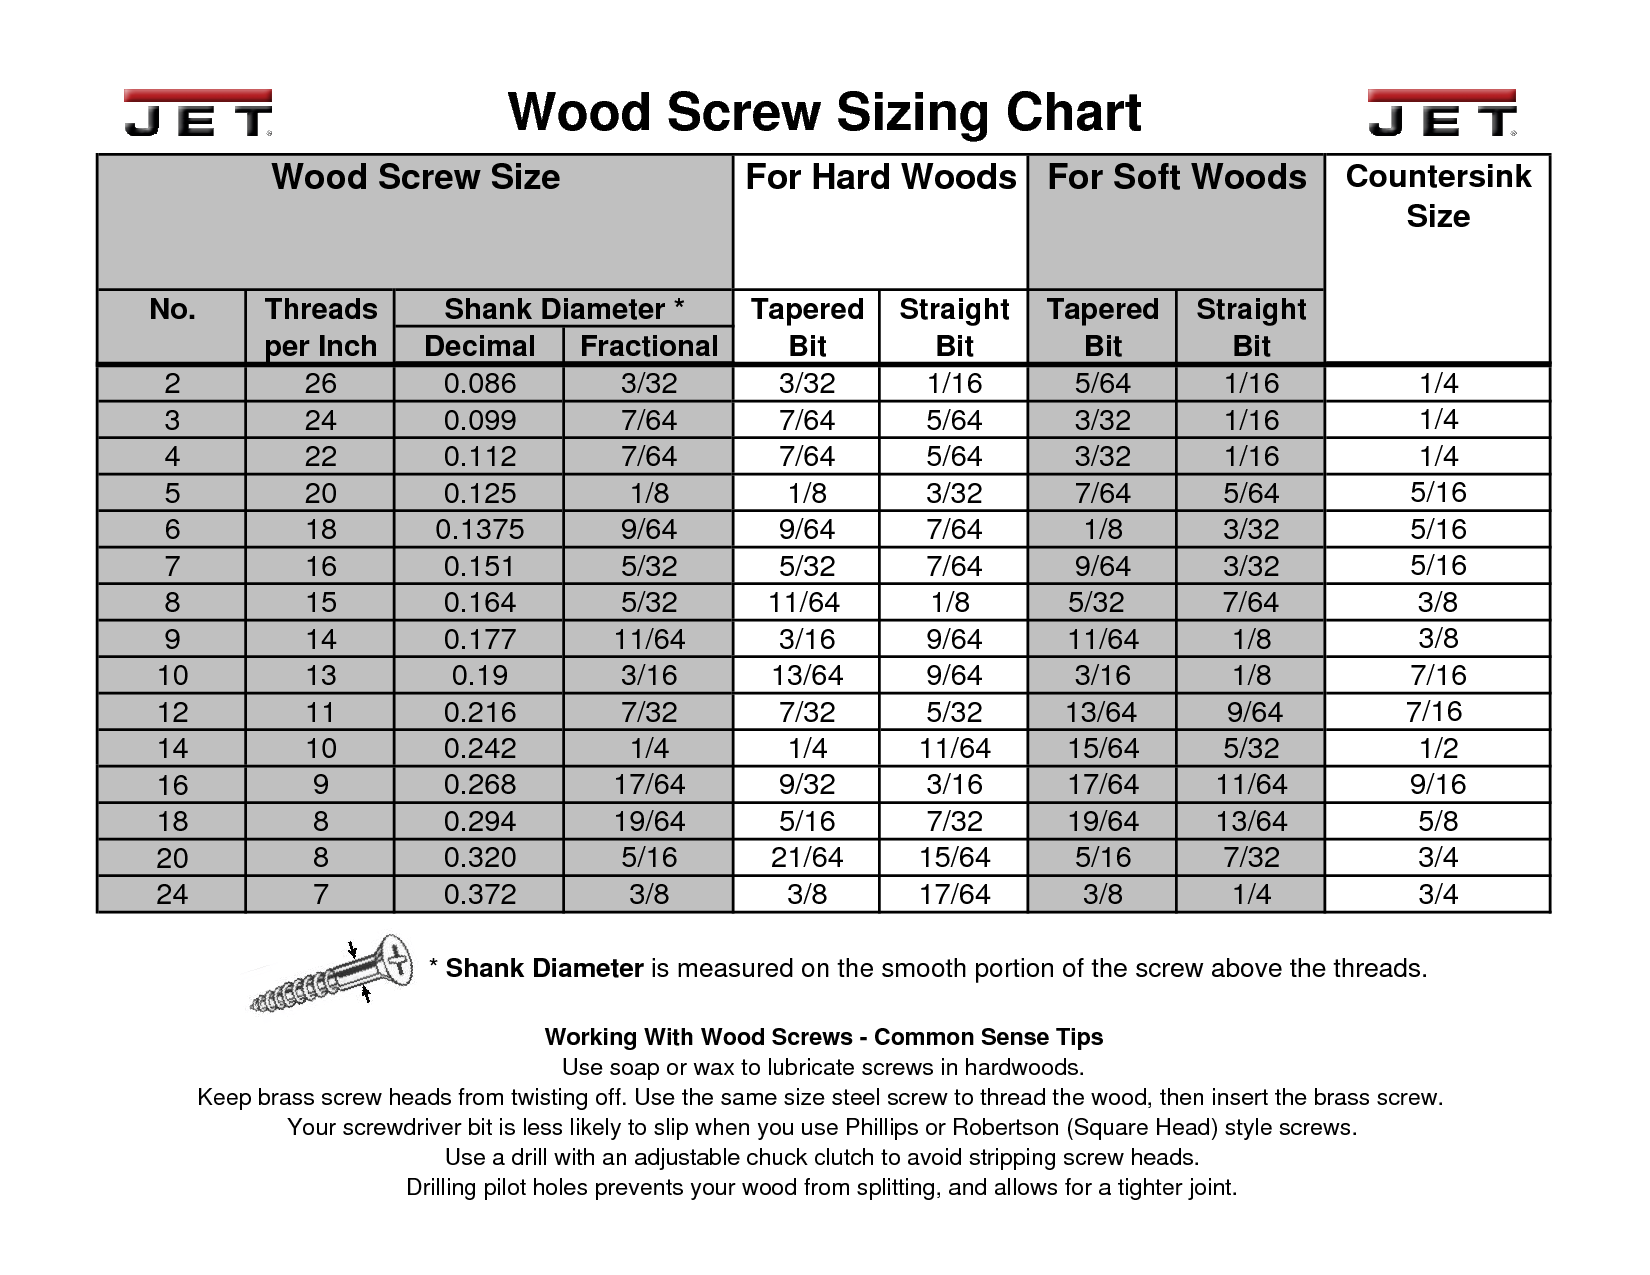 wood-screw-sizing-chart-how-to-build-an-easy-diy-woodworking-projects